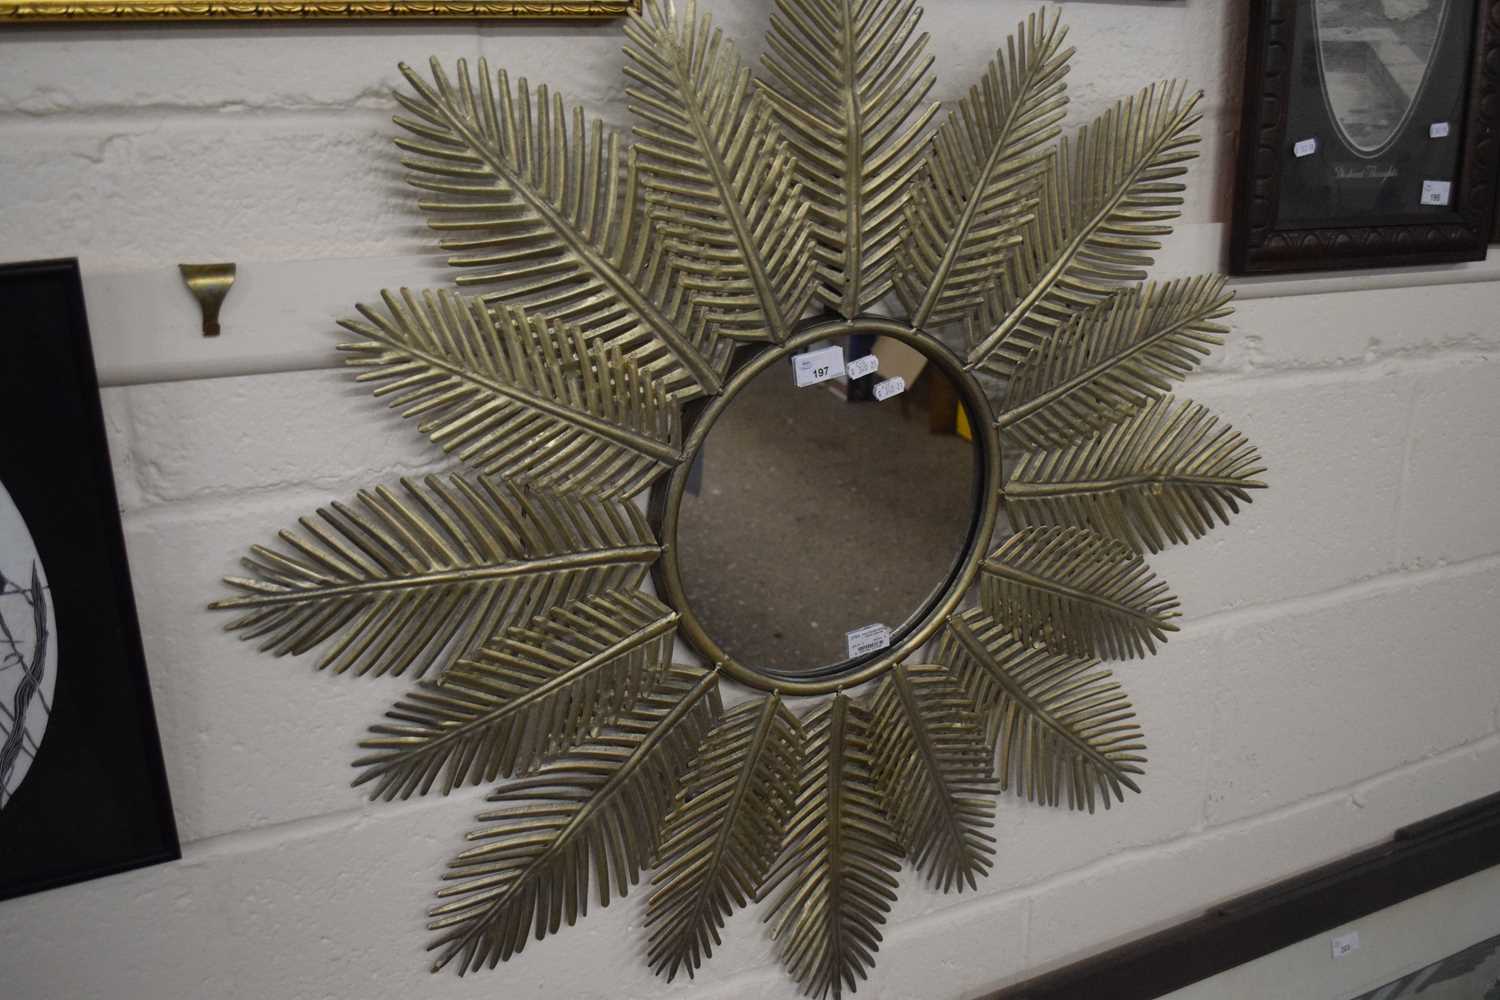 Sophisticated garden mirror with central circular mirror plate surrounded by metal palm leaf fronds